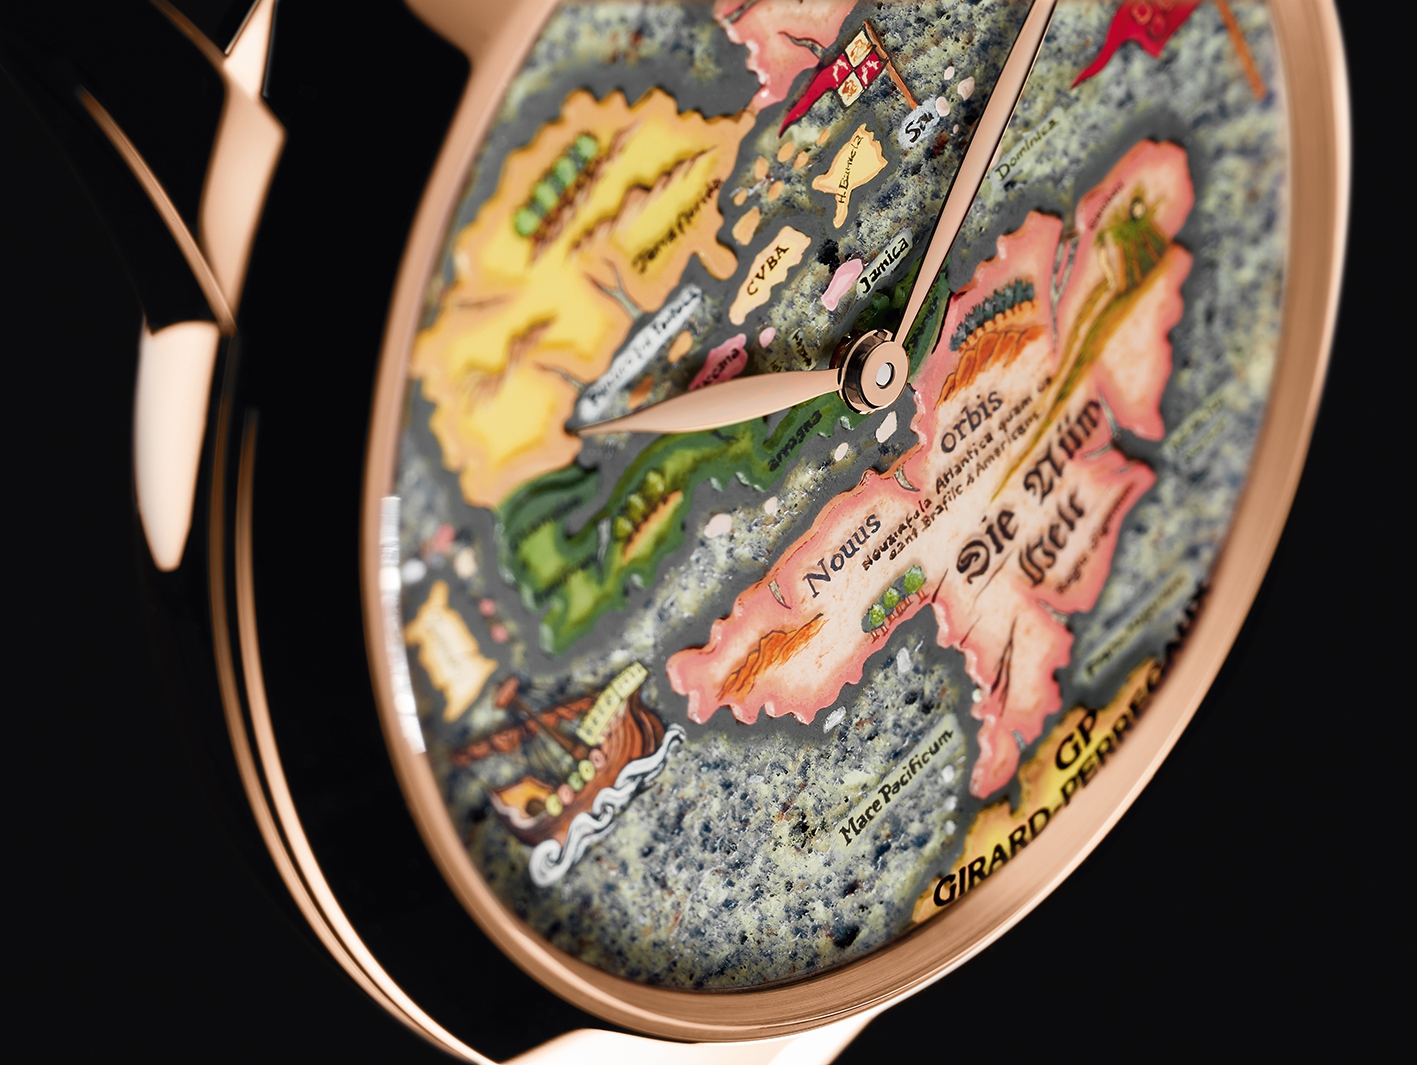 The dial of the New World timepiece